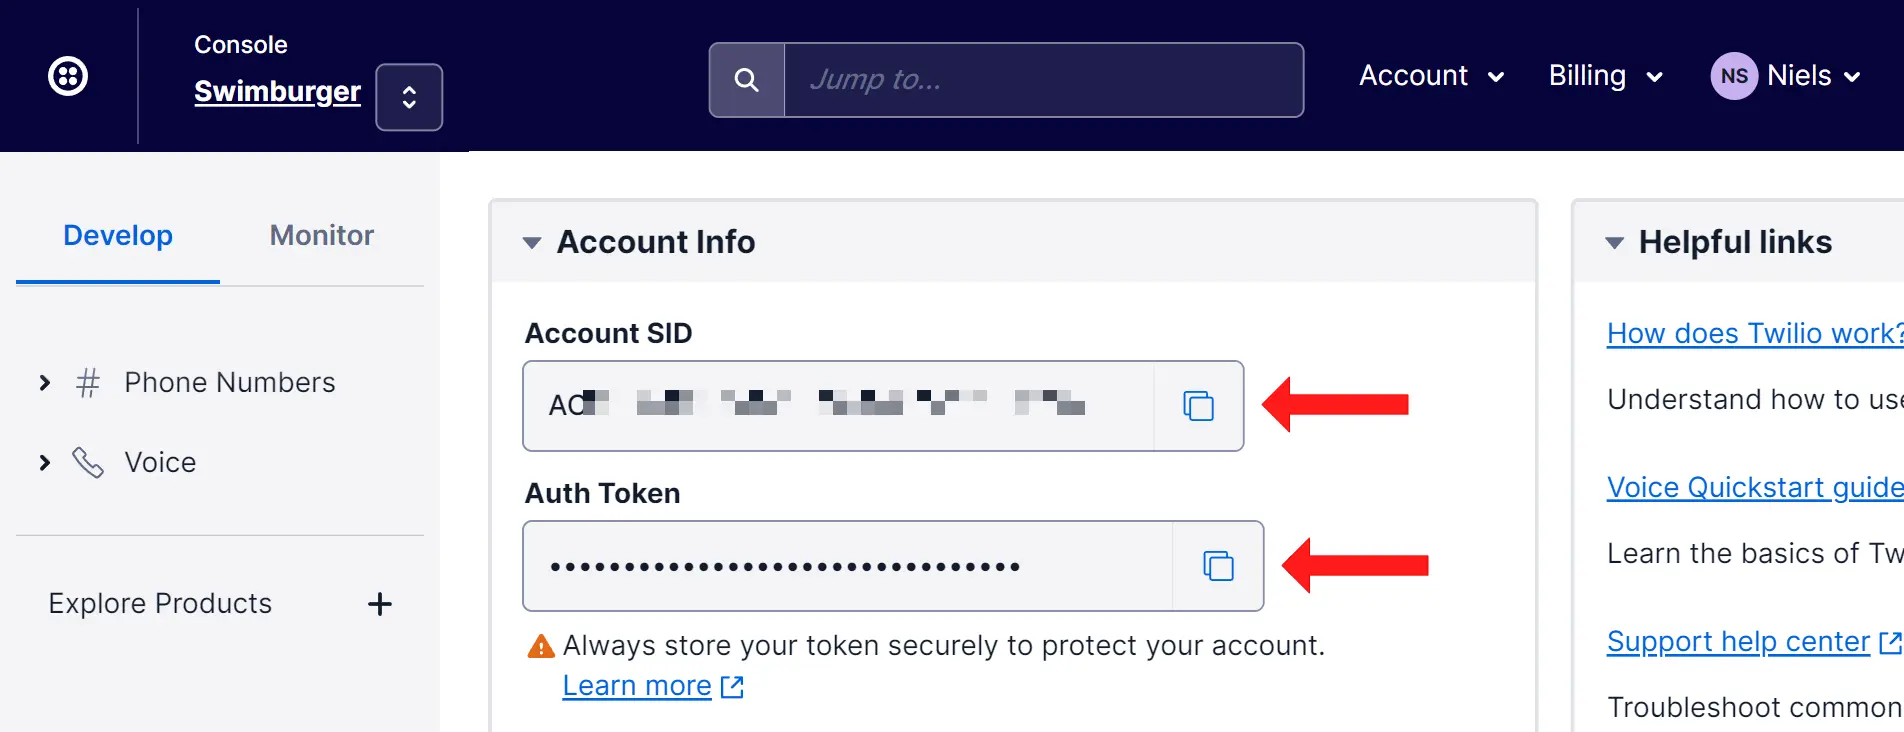 Twilio account dashboard with the Account SID and the Auth Token is pointed out by arrows.